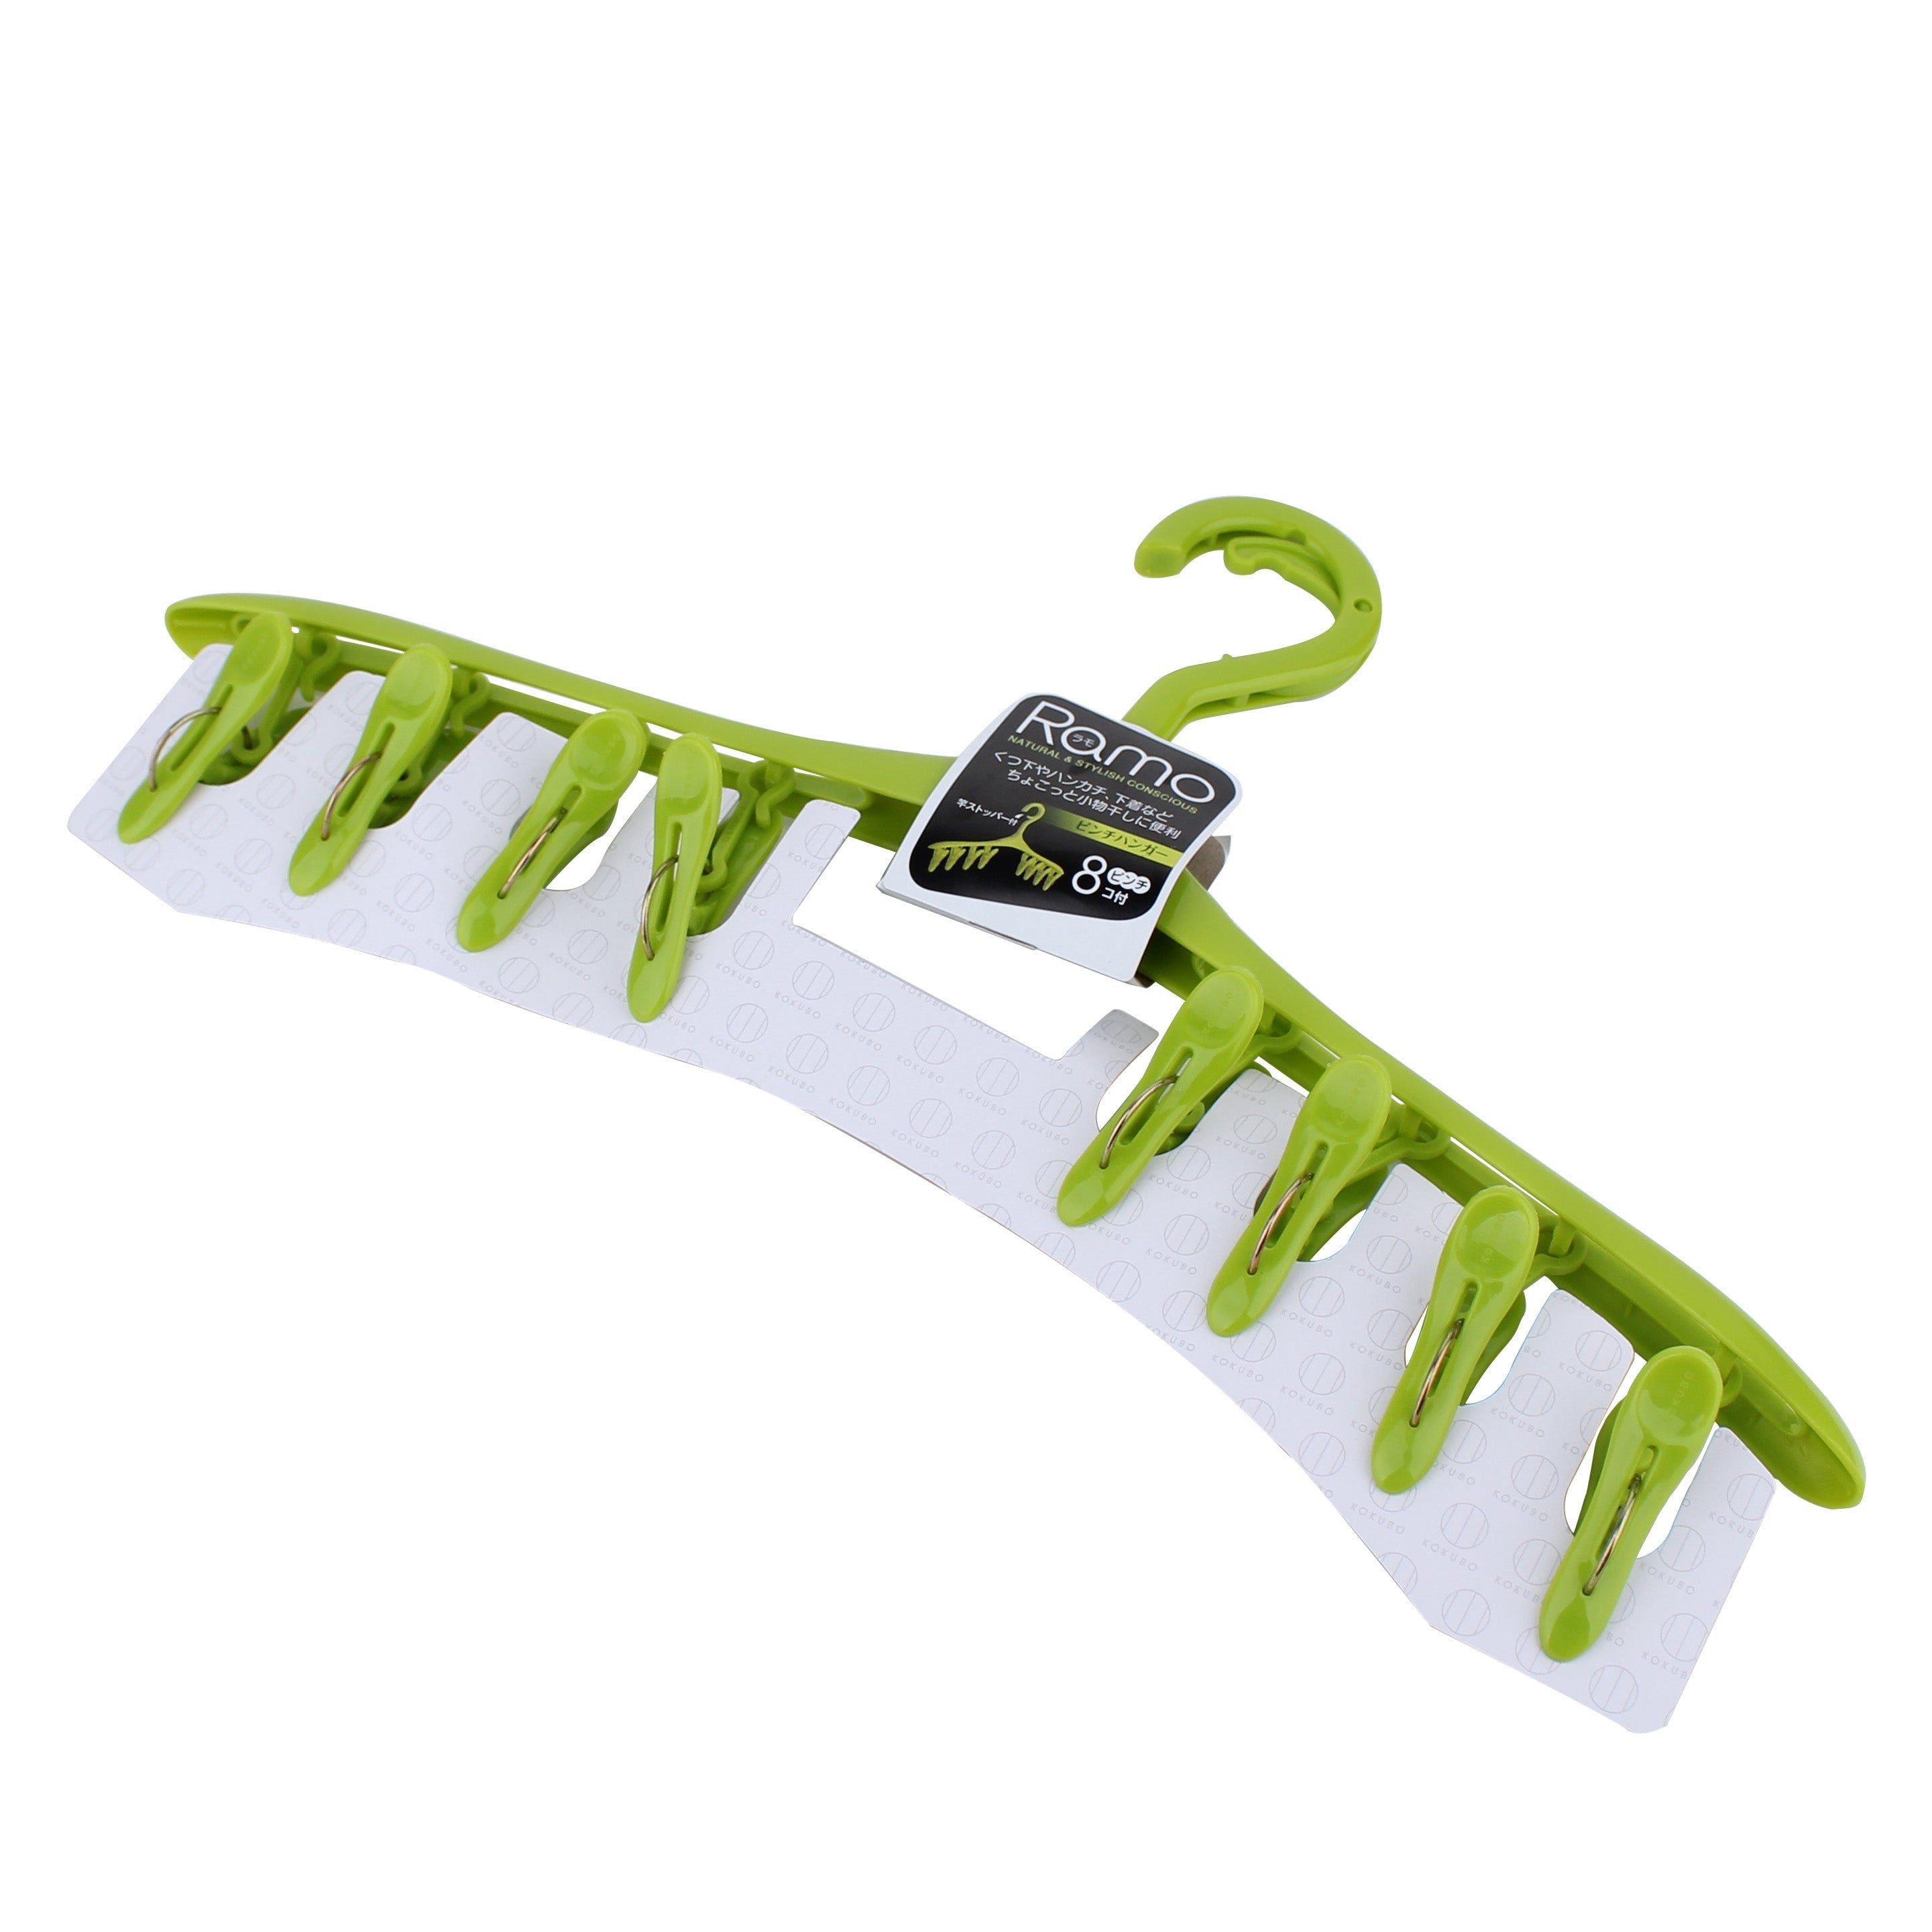 Buy LEOPAX Bamboo Shirt Hangers with Metal Clips